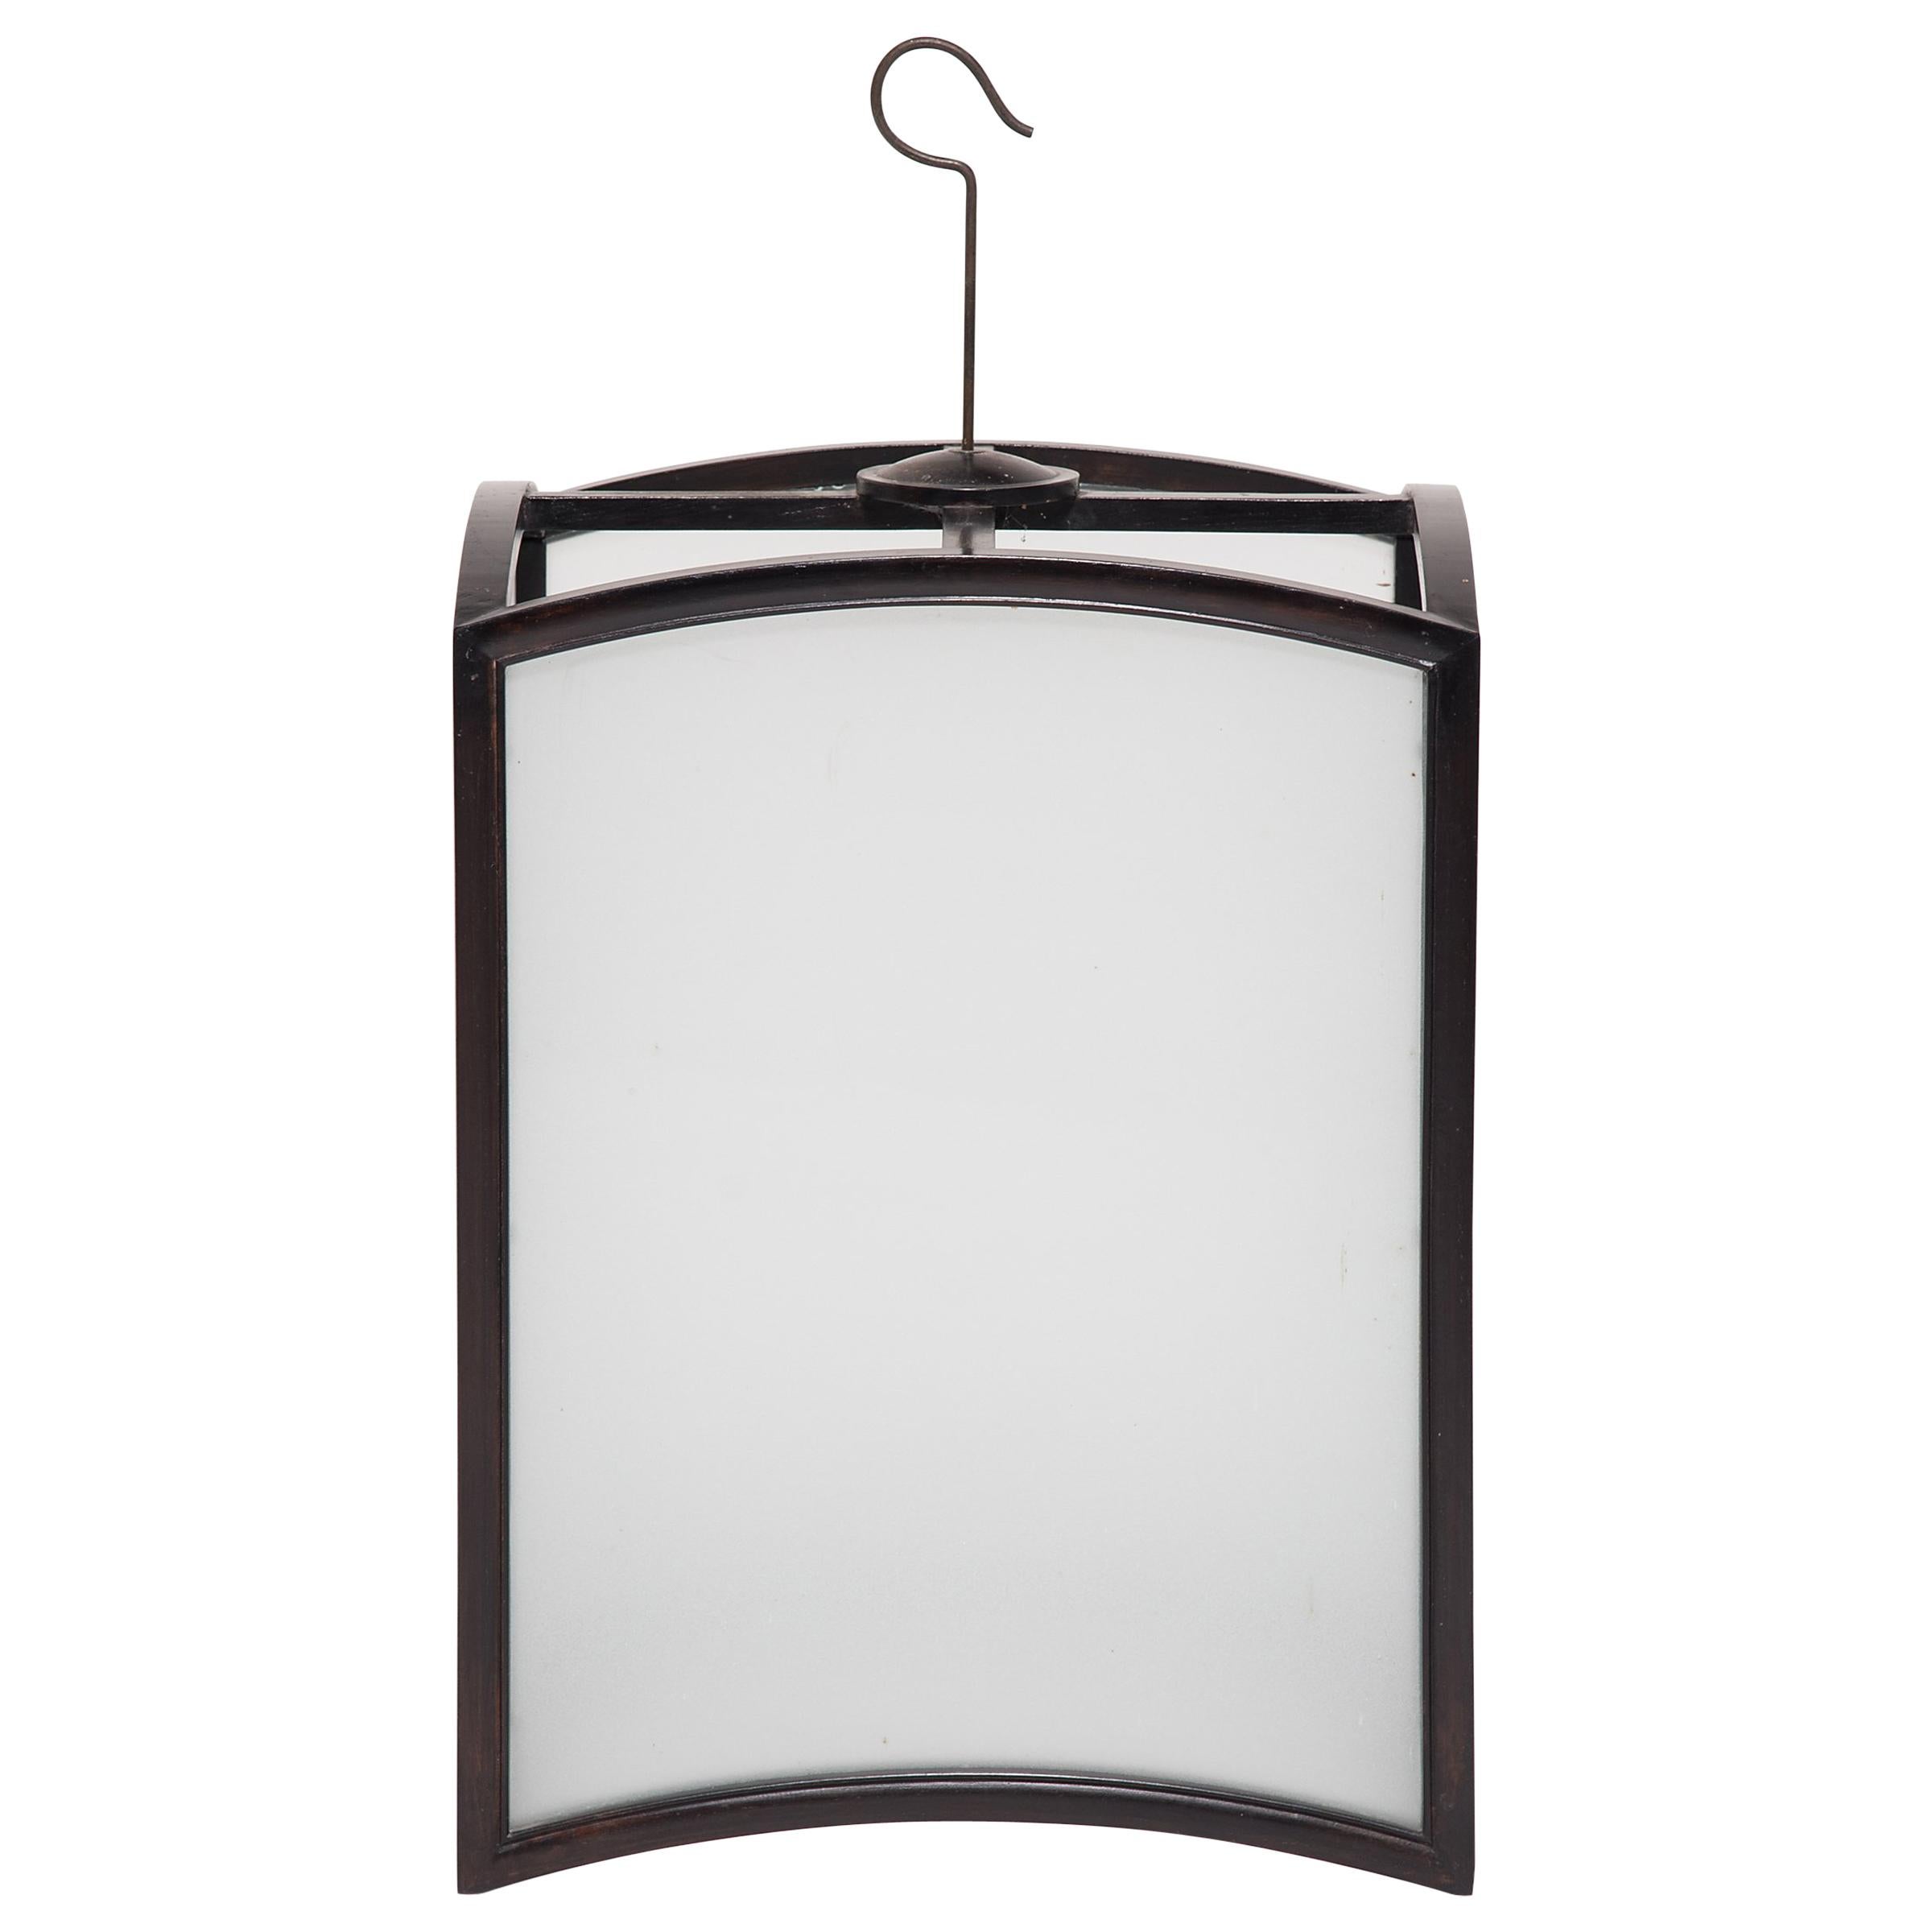 Chinese Arched Square Lantern